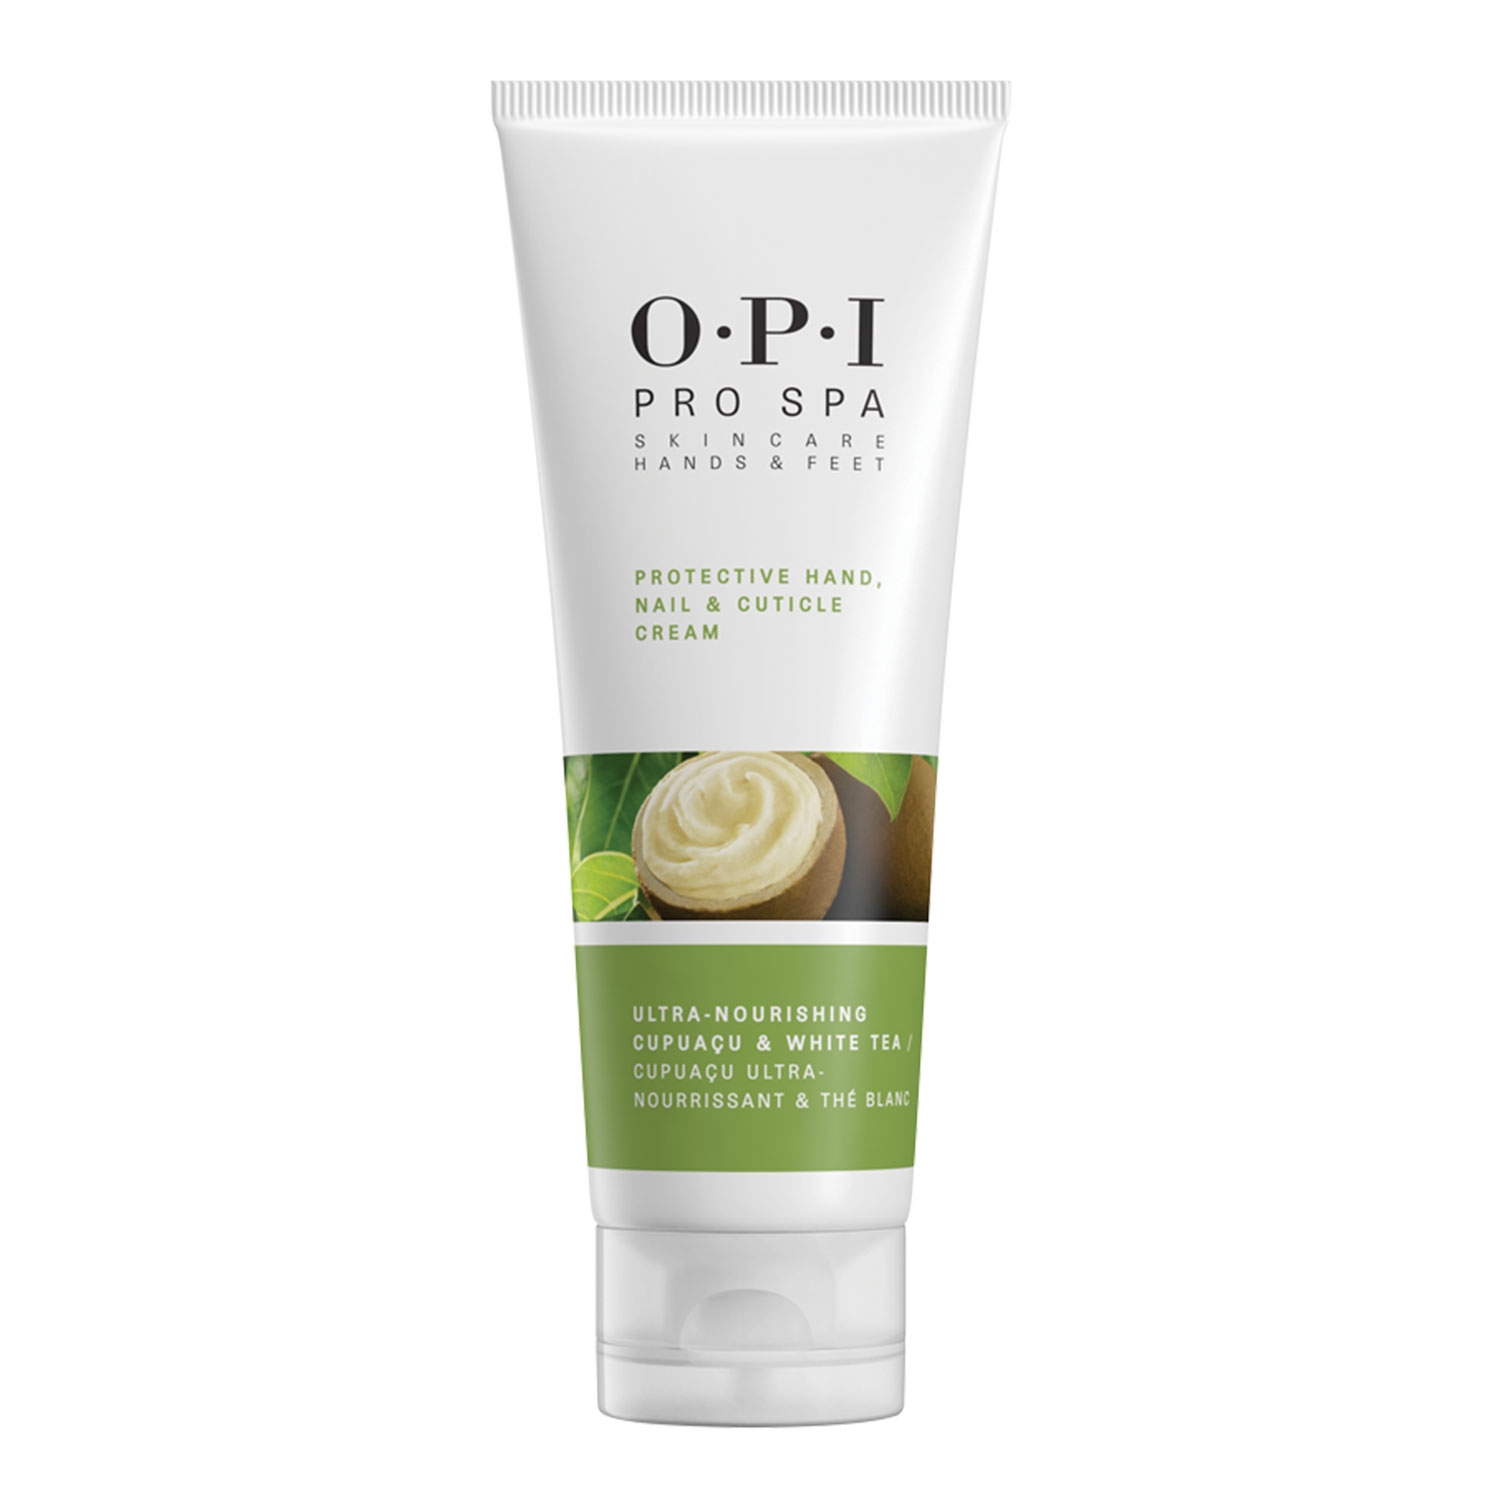 Product image from Pro Spa - Protective Hand, Nail and Cuticle Cream